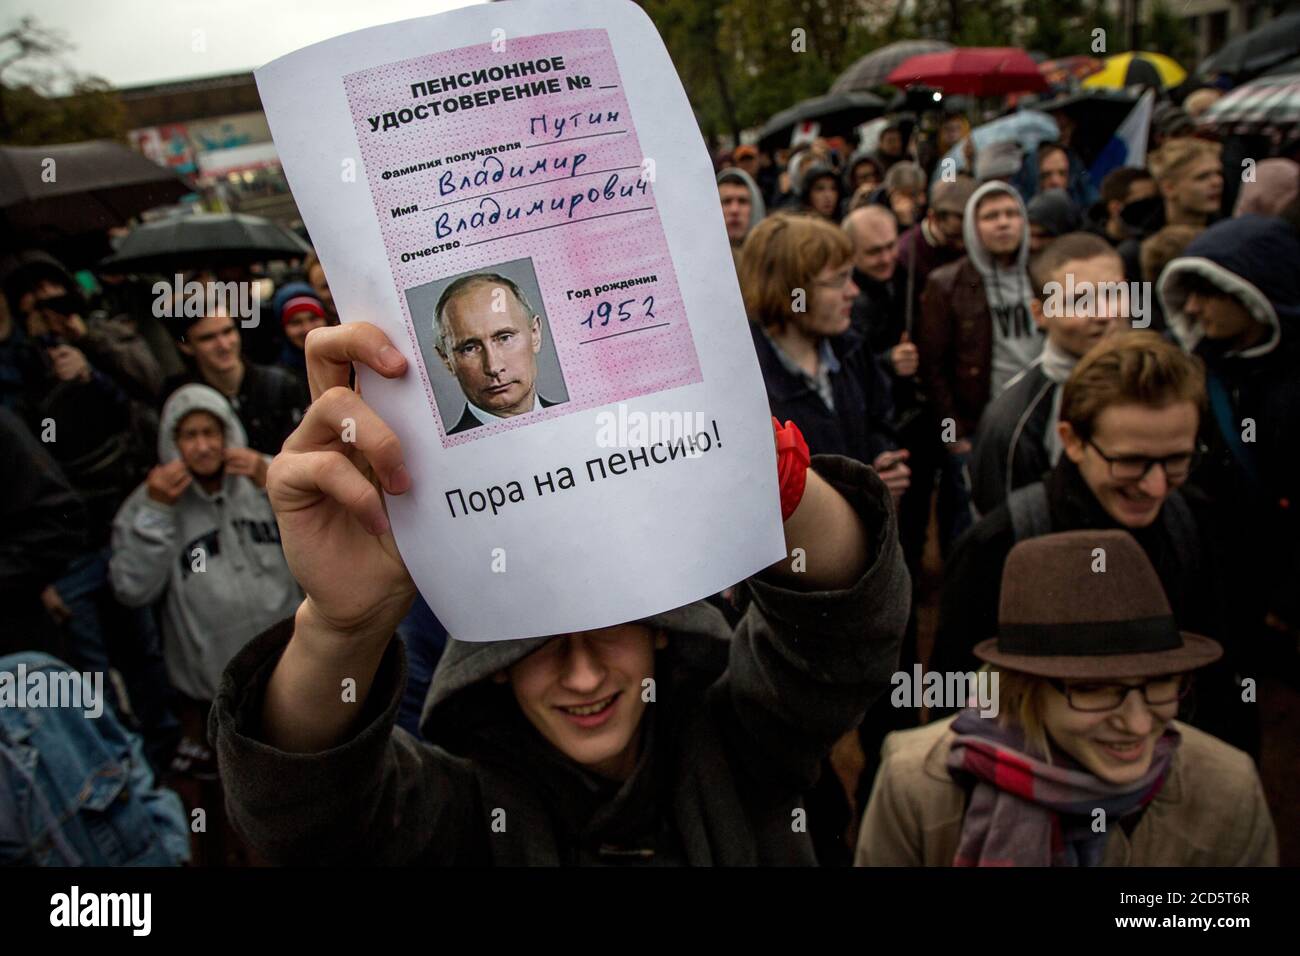 Moscow, Russia. 7th October, 2017. People attend an unauthorized anti-Kremlin rally called by opposition leader Alexei Navalny, who is serving a 20-day jail sentence, in downtown Moscow at day of President Vladimir Putin's 65th birthday. A young man holds a pension certificate with portrait Vladimir Putin with inscription 'It's time to retire' Stock Photo